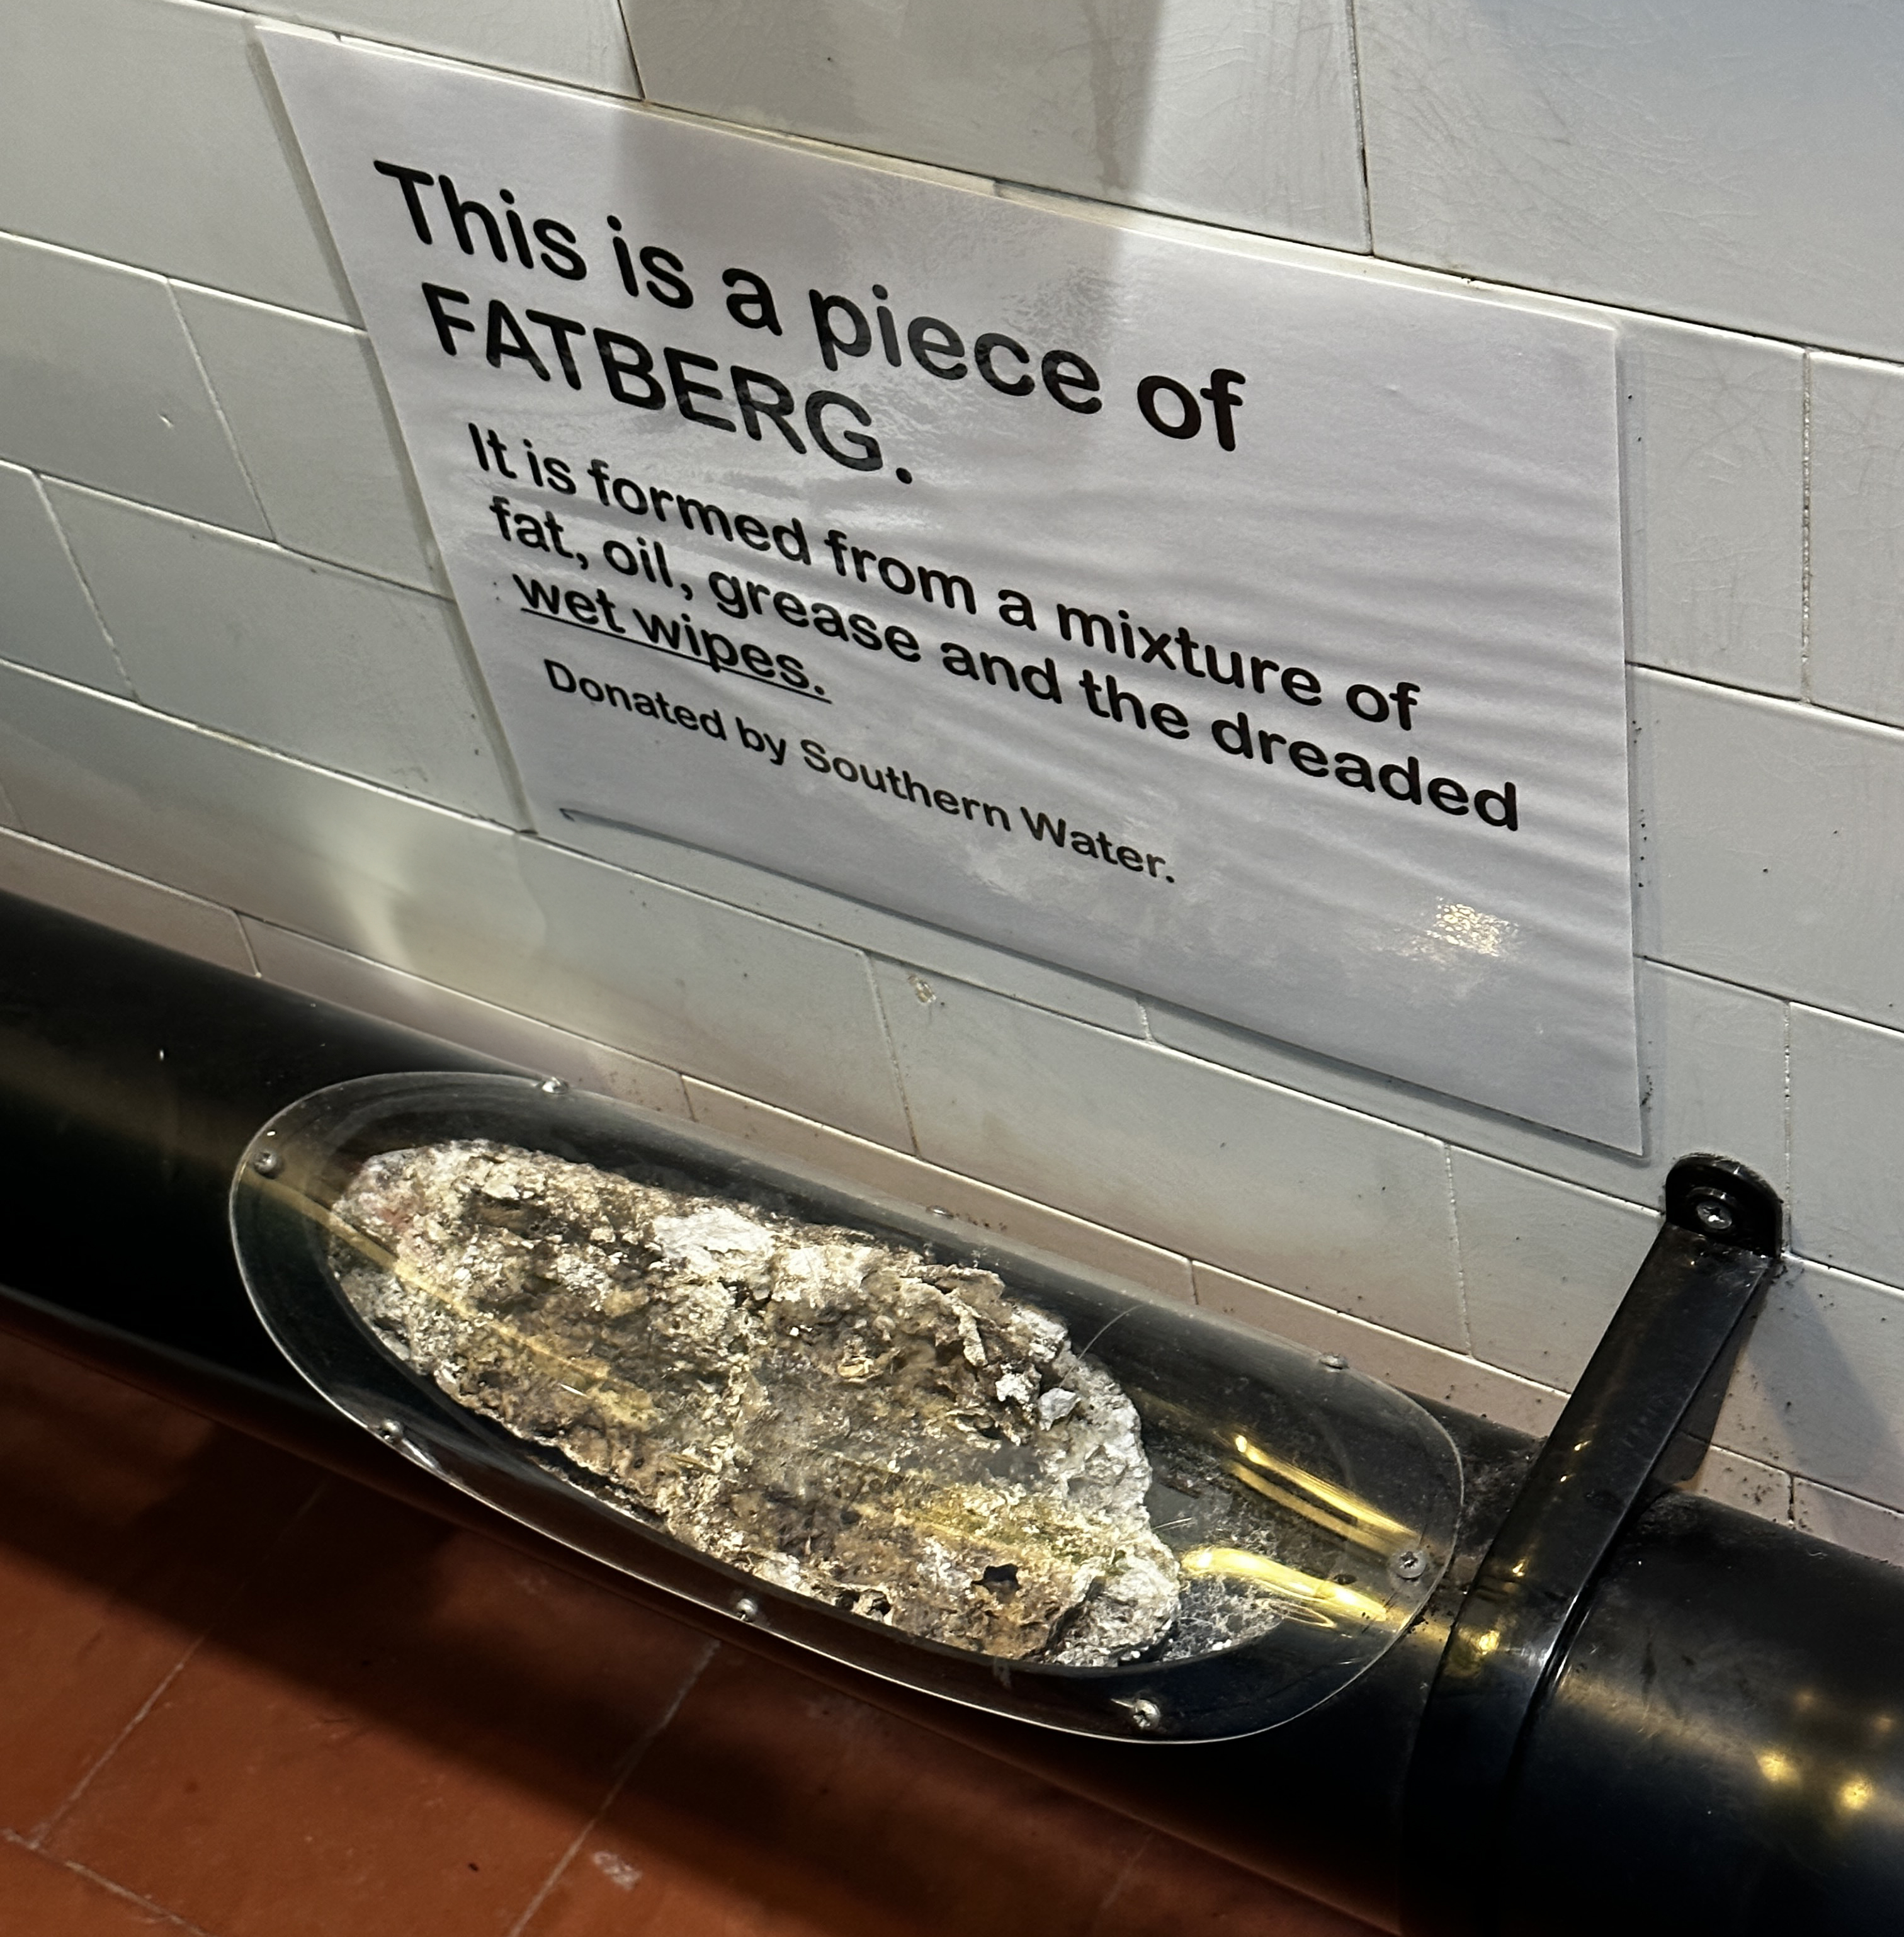 A fatberg of wet wipes blocking a sewer pipe